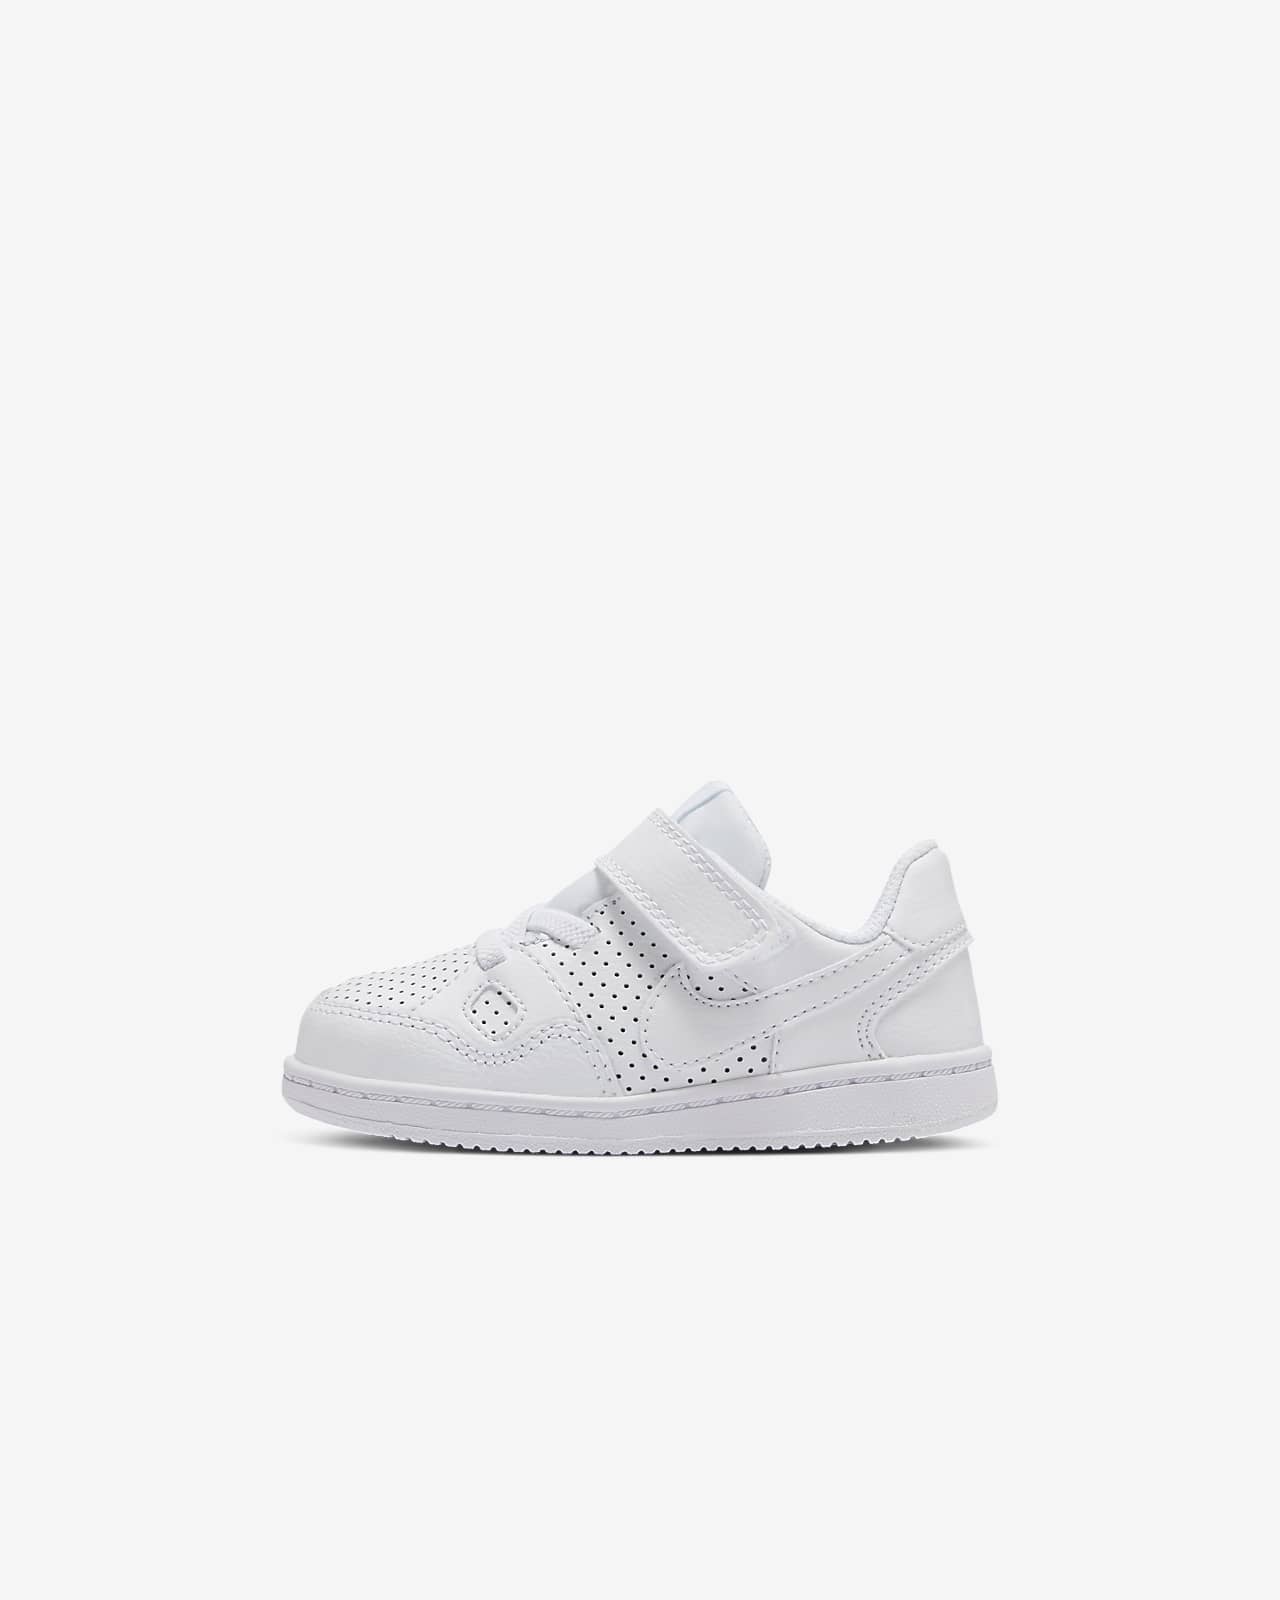 Nike Son of Force Toddler Shoe